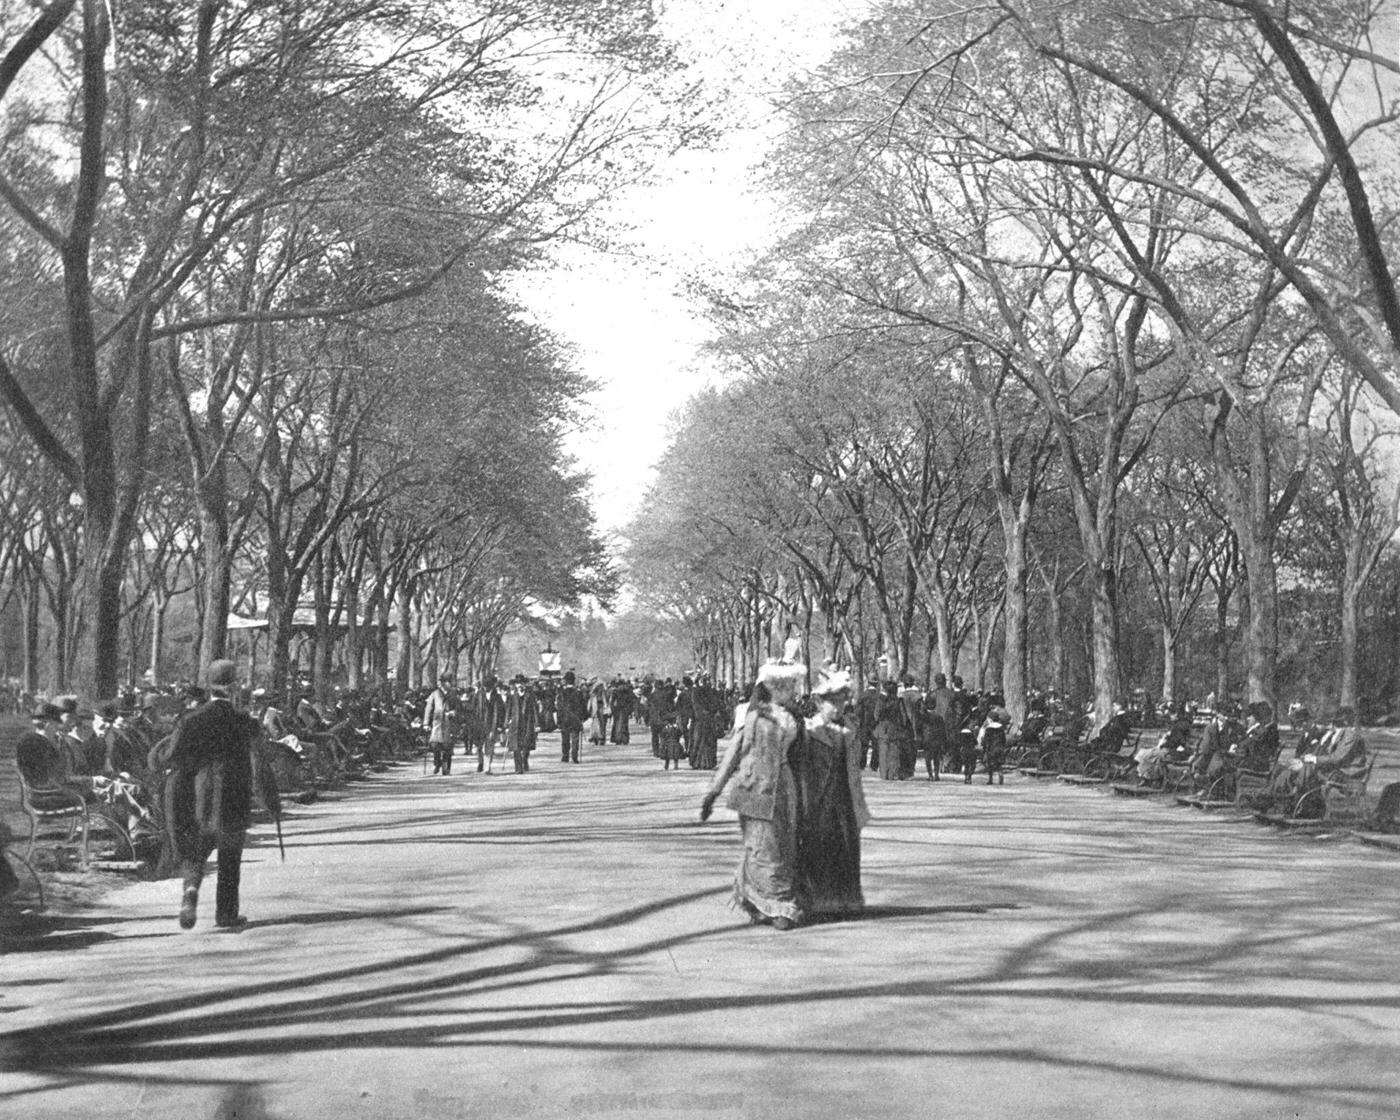 The Mall, Central Park, People Strolling In The Pedestrian Esplanade Of Central Park Mall, New York City, 1900